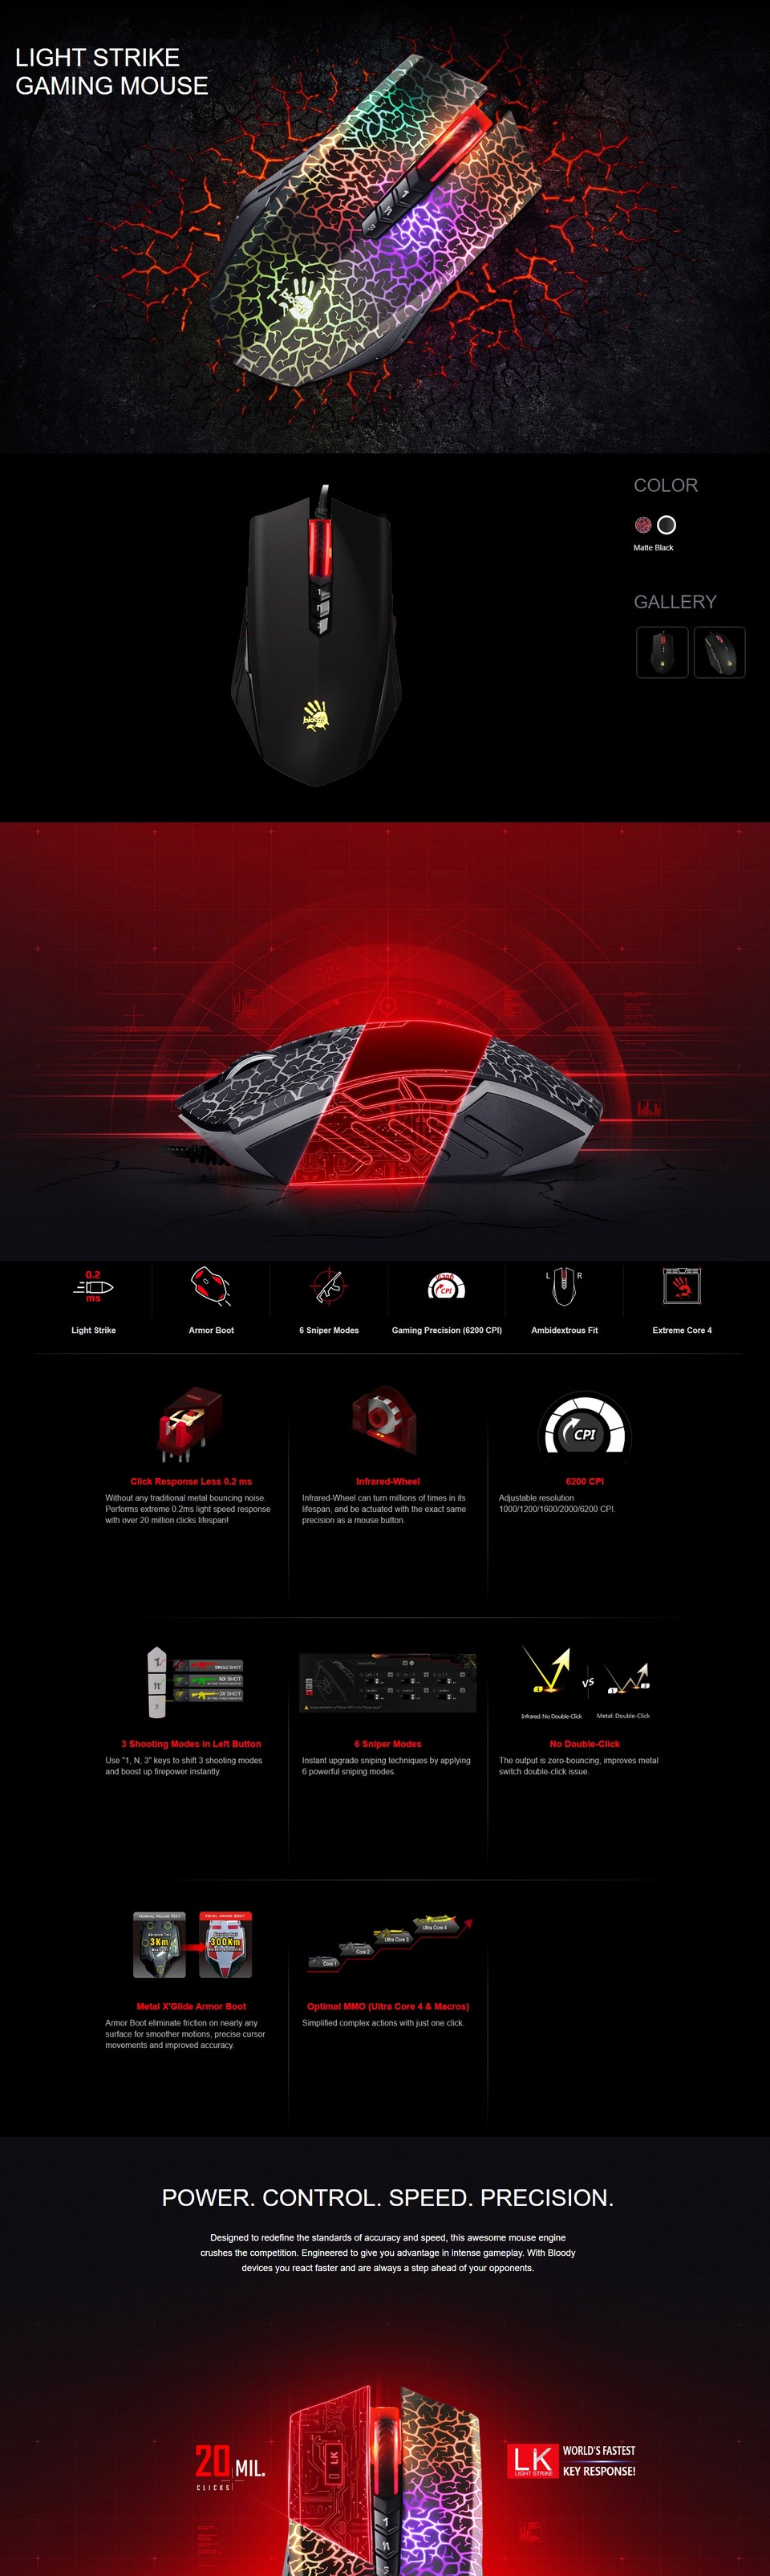 bloody a70 light strike gaming mouse